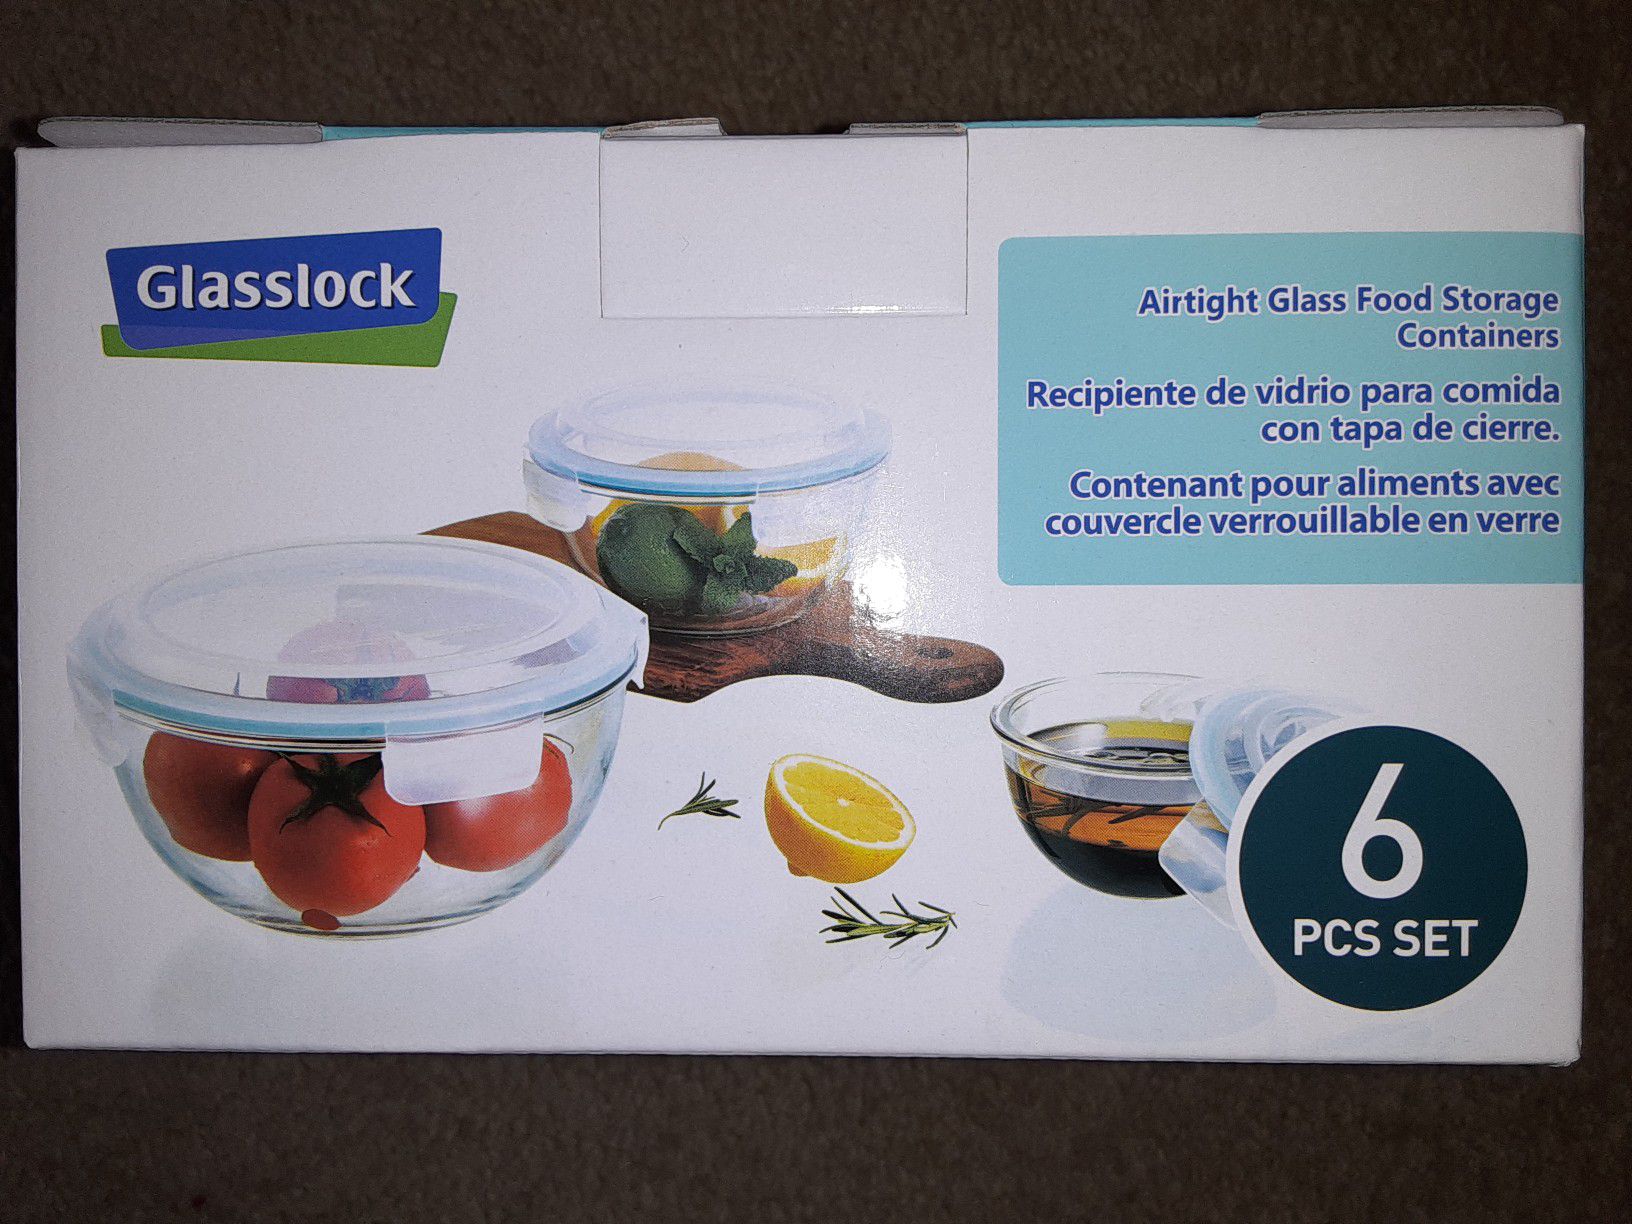 Glasslock Food Containers